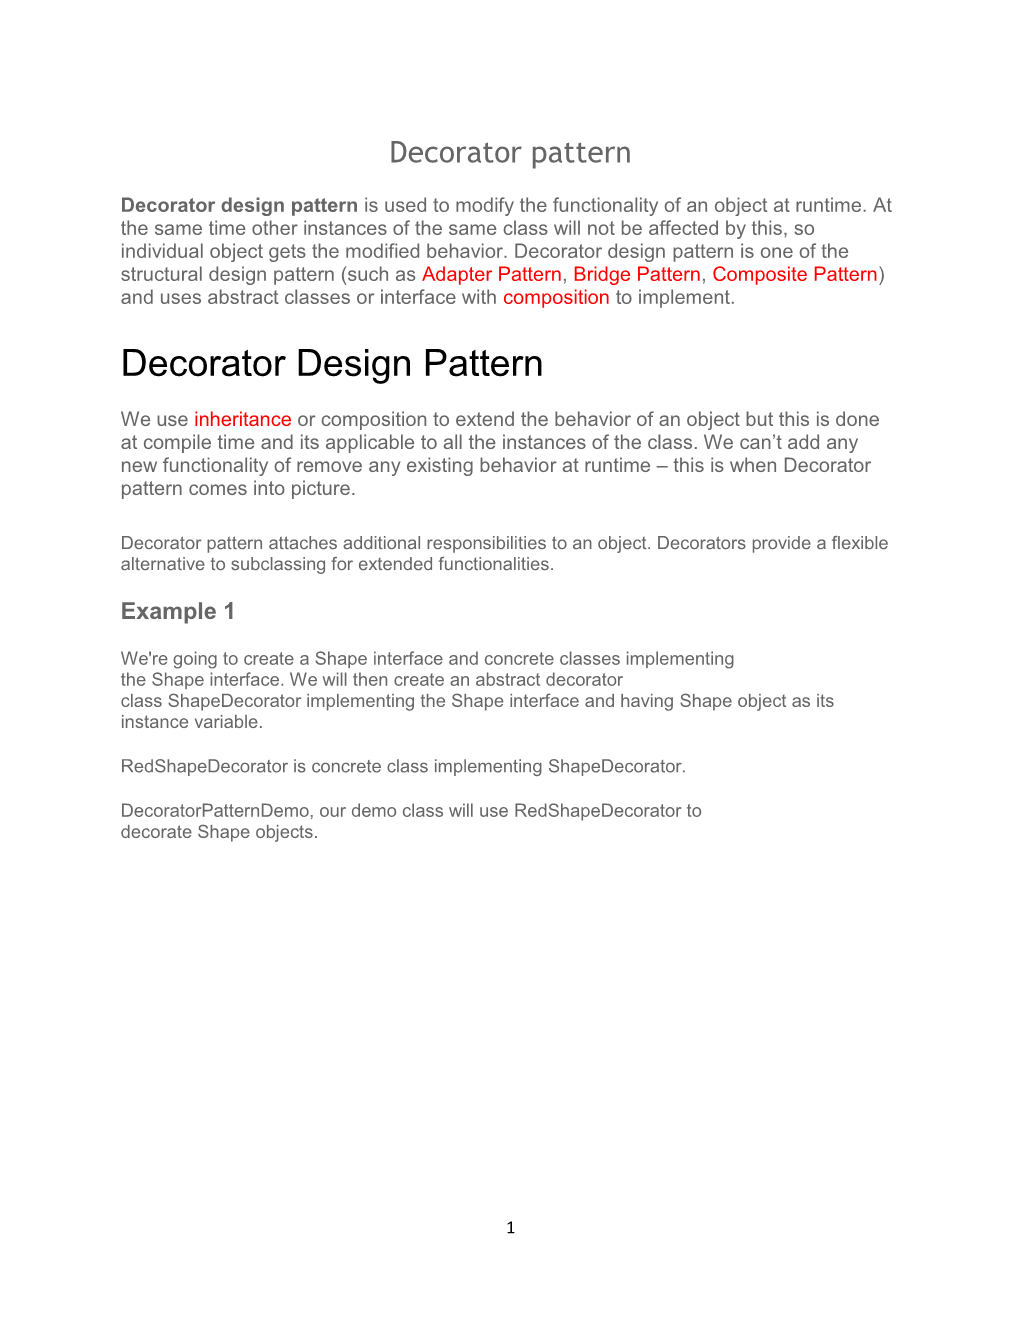 Decorator Design Pattern Is Used to Modify the Functionality of an Object at Runtime